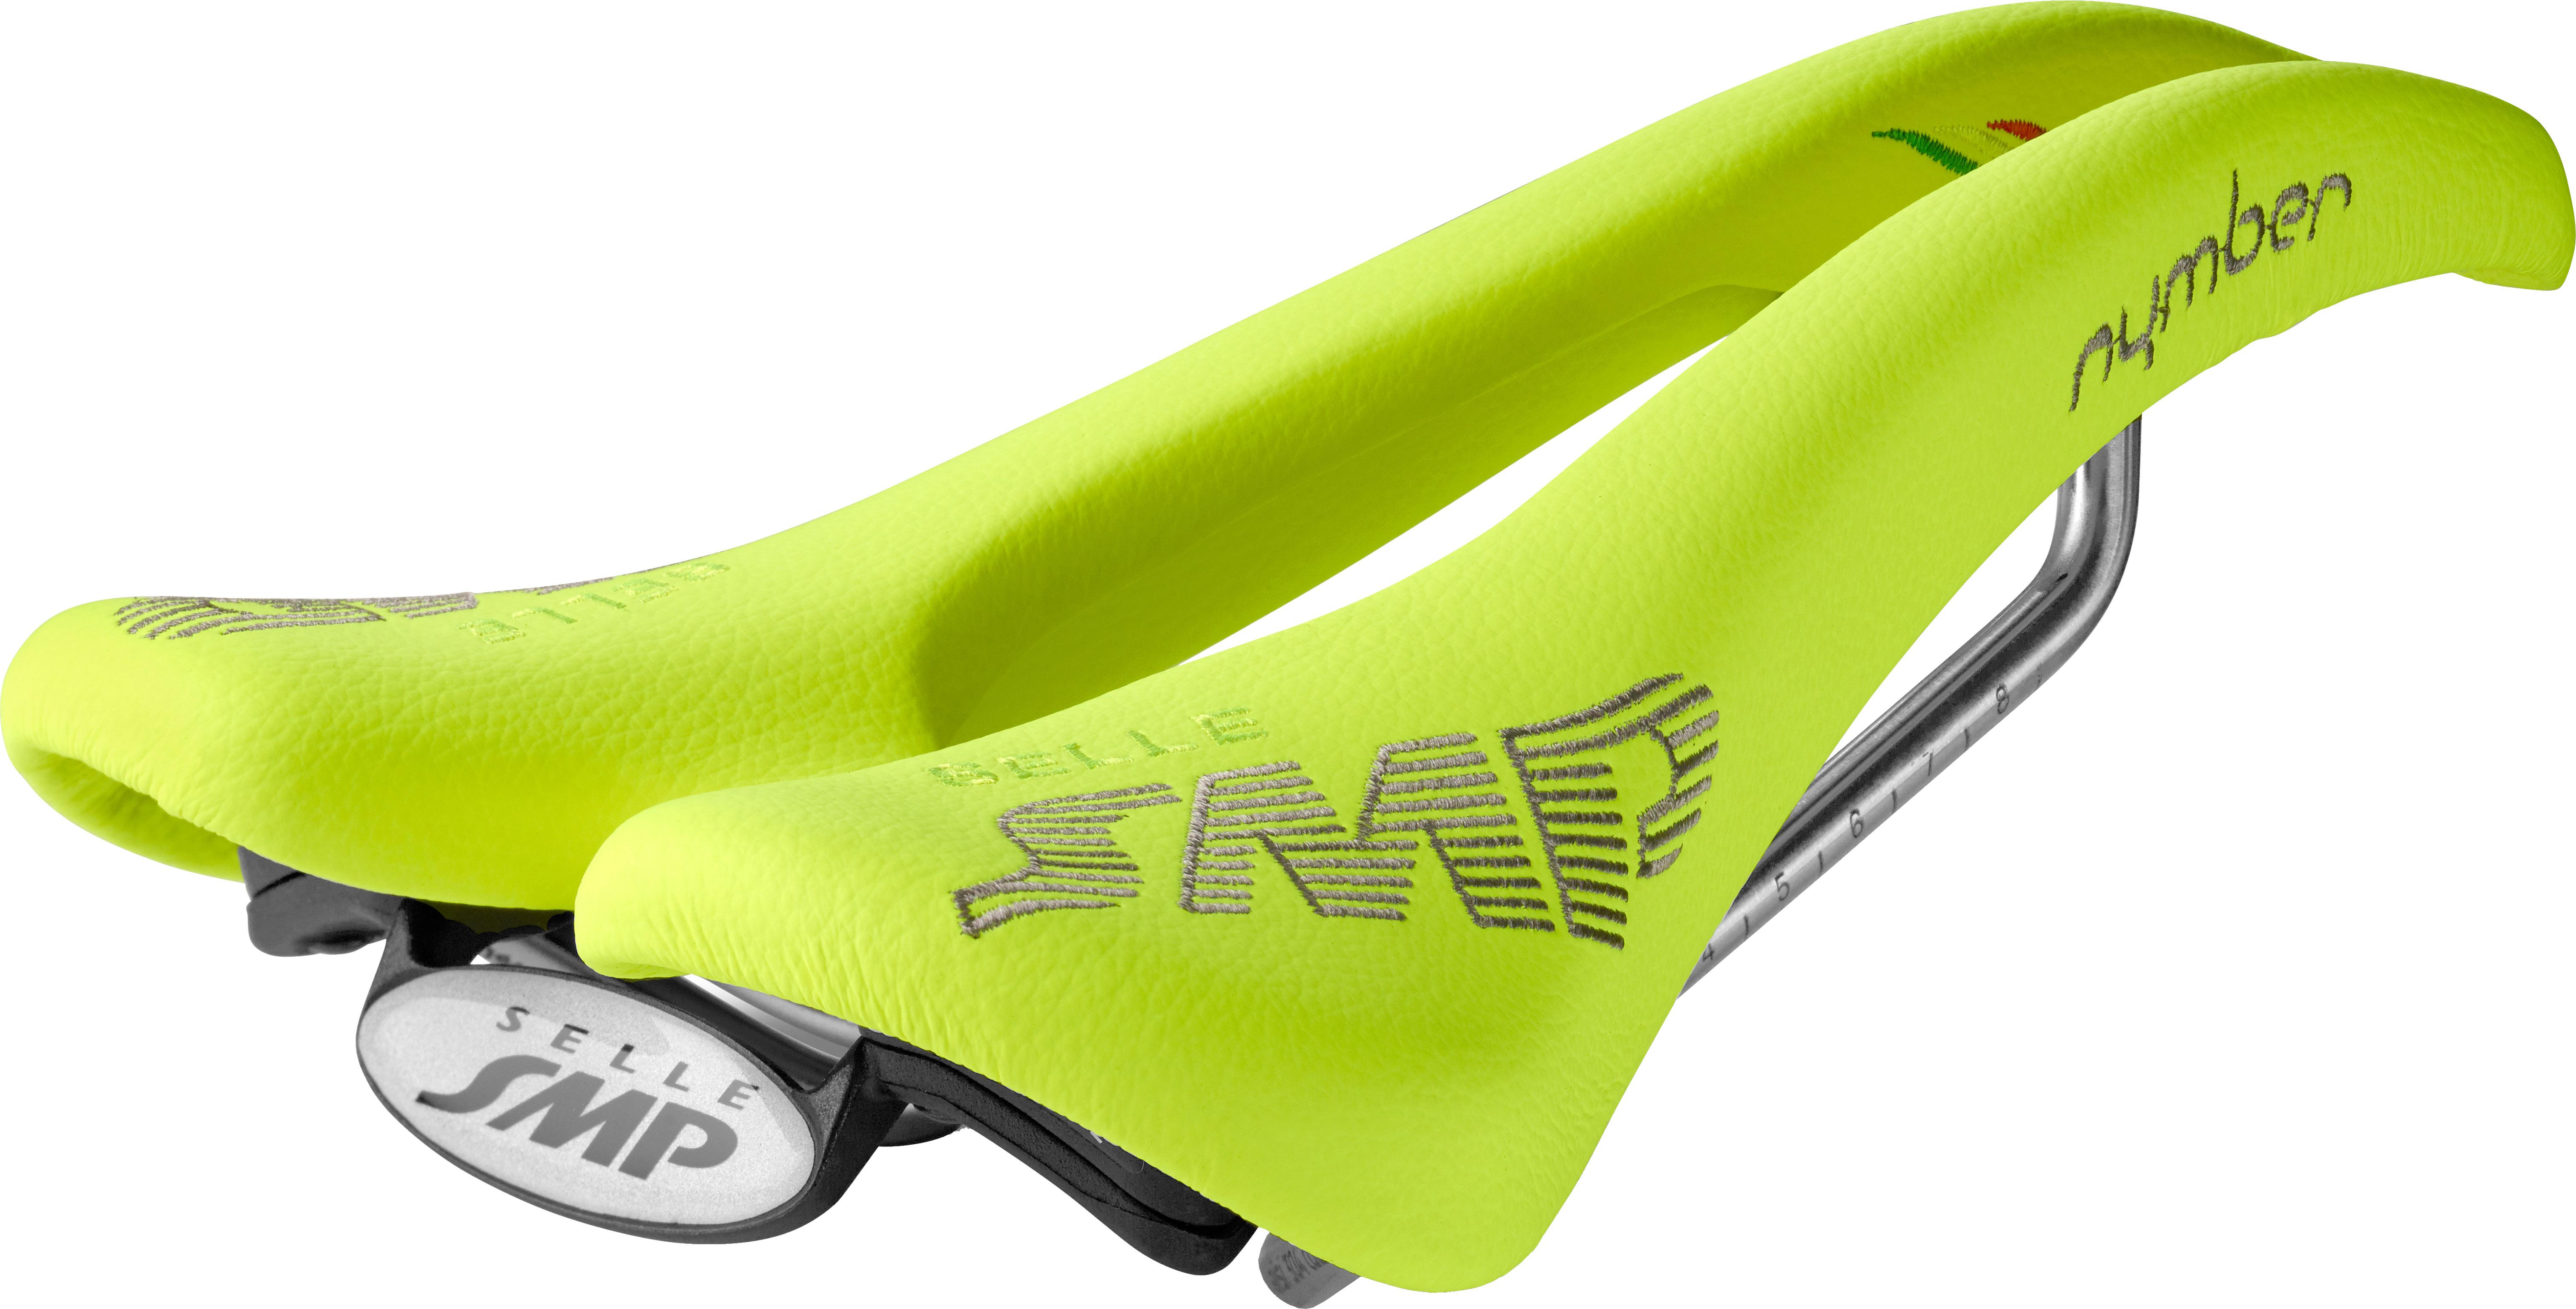 Selle Smp Nymber Bike Saddle  Fluo Yellow